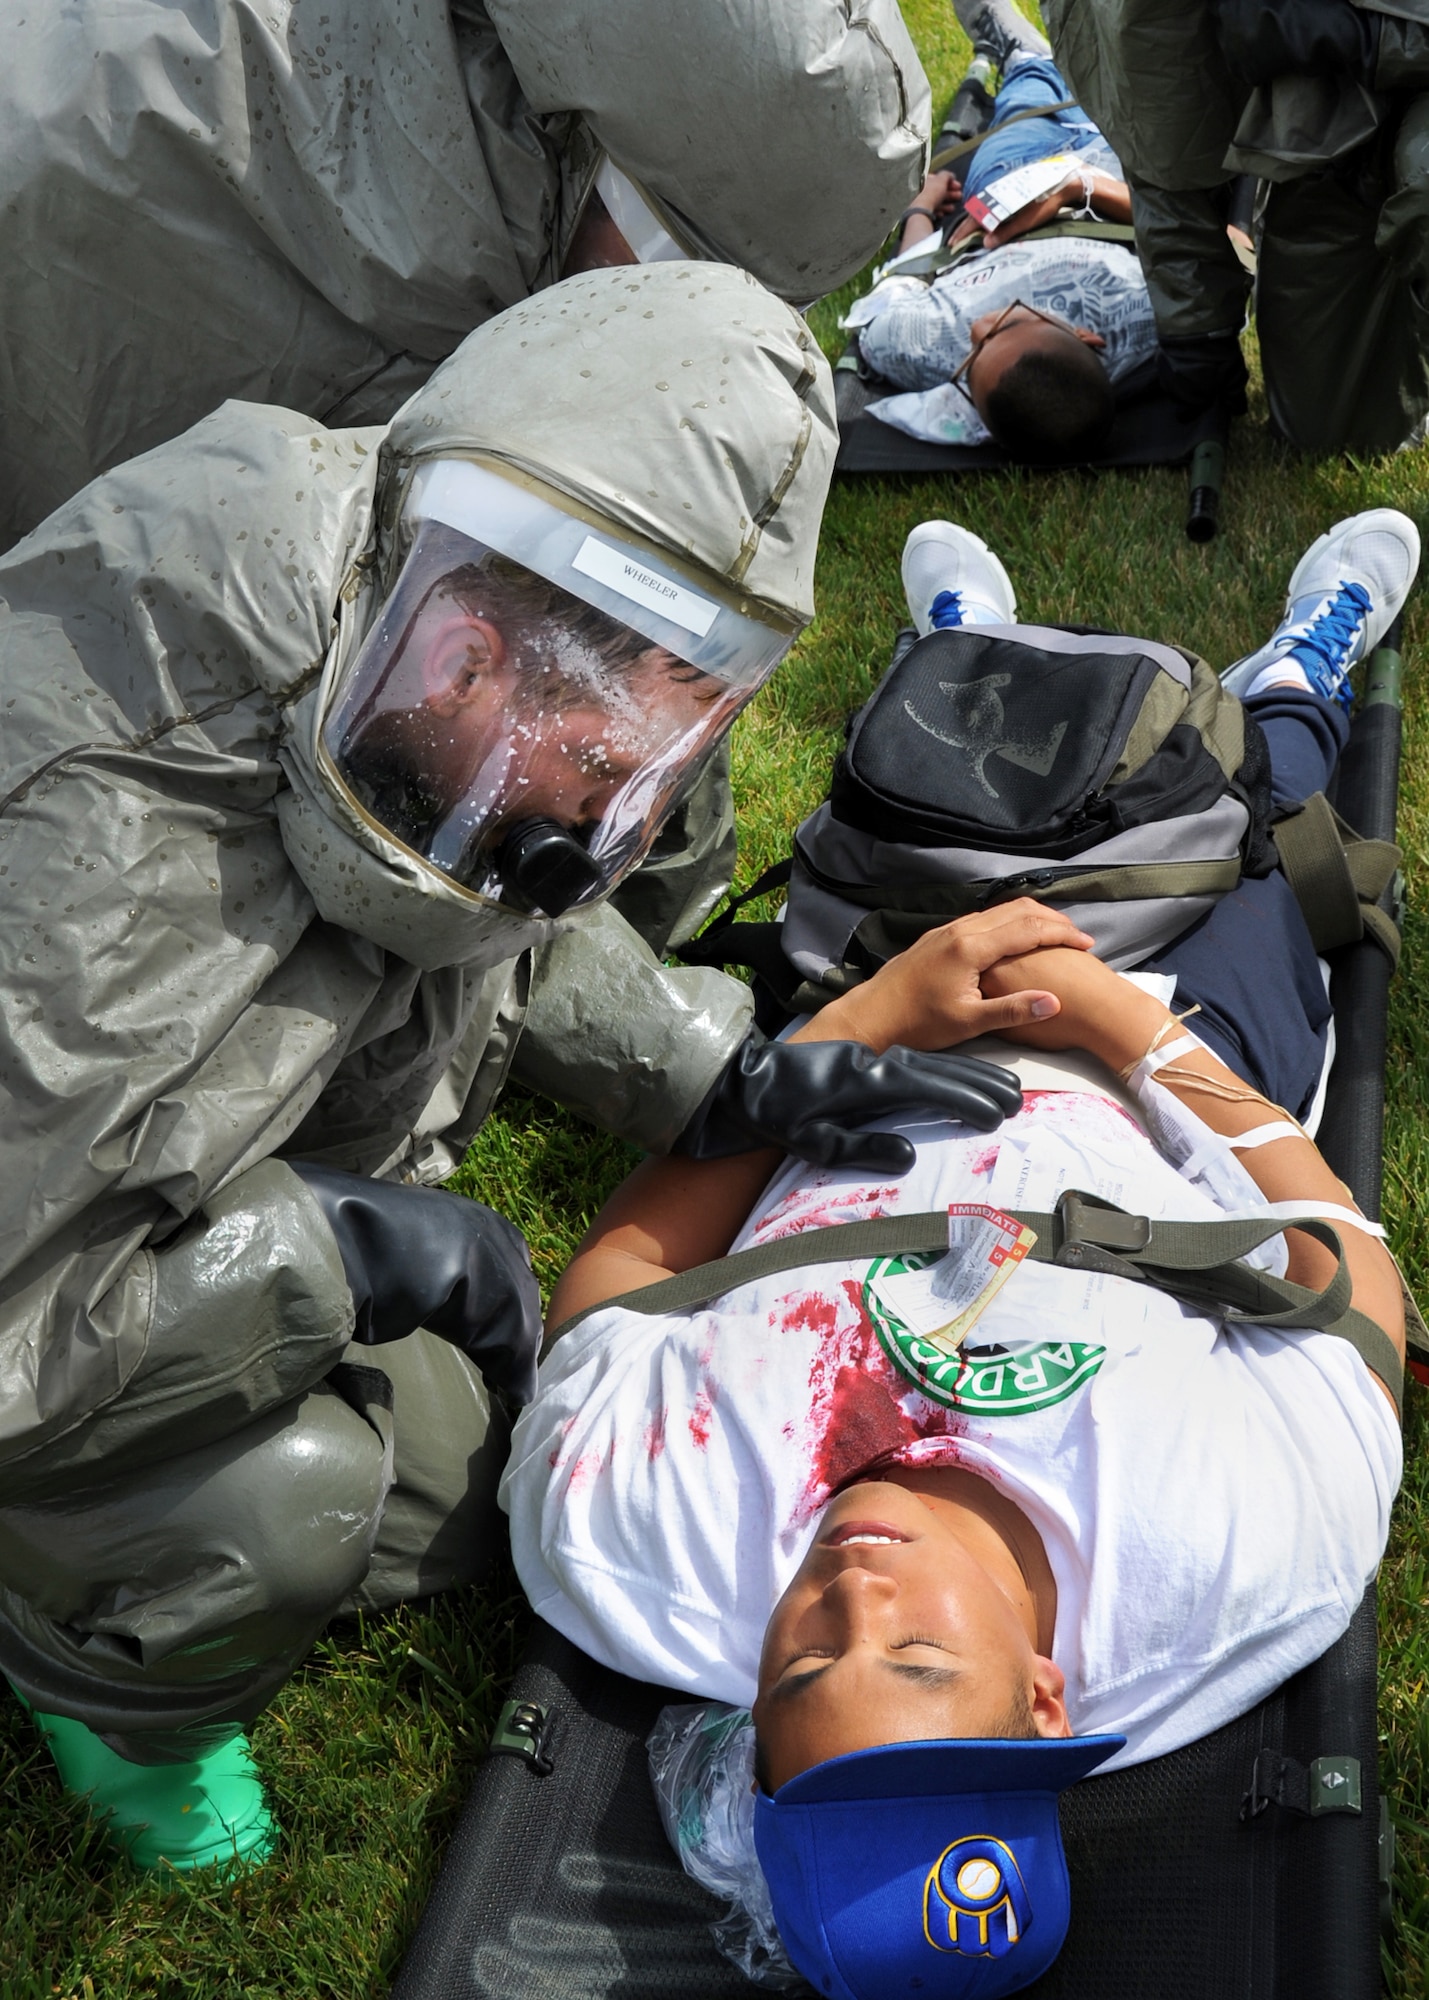 60th Medical Group personal decontaminate the simulated injured during an emergency response exercise at Travis Air Force Base, California on 12 May 2010 prior to entering David Grant Medical Center for further medical treatment. (U.S. Air Force photo by Civ/Jay Trottier)